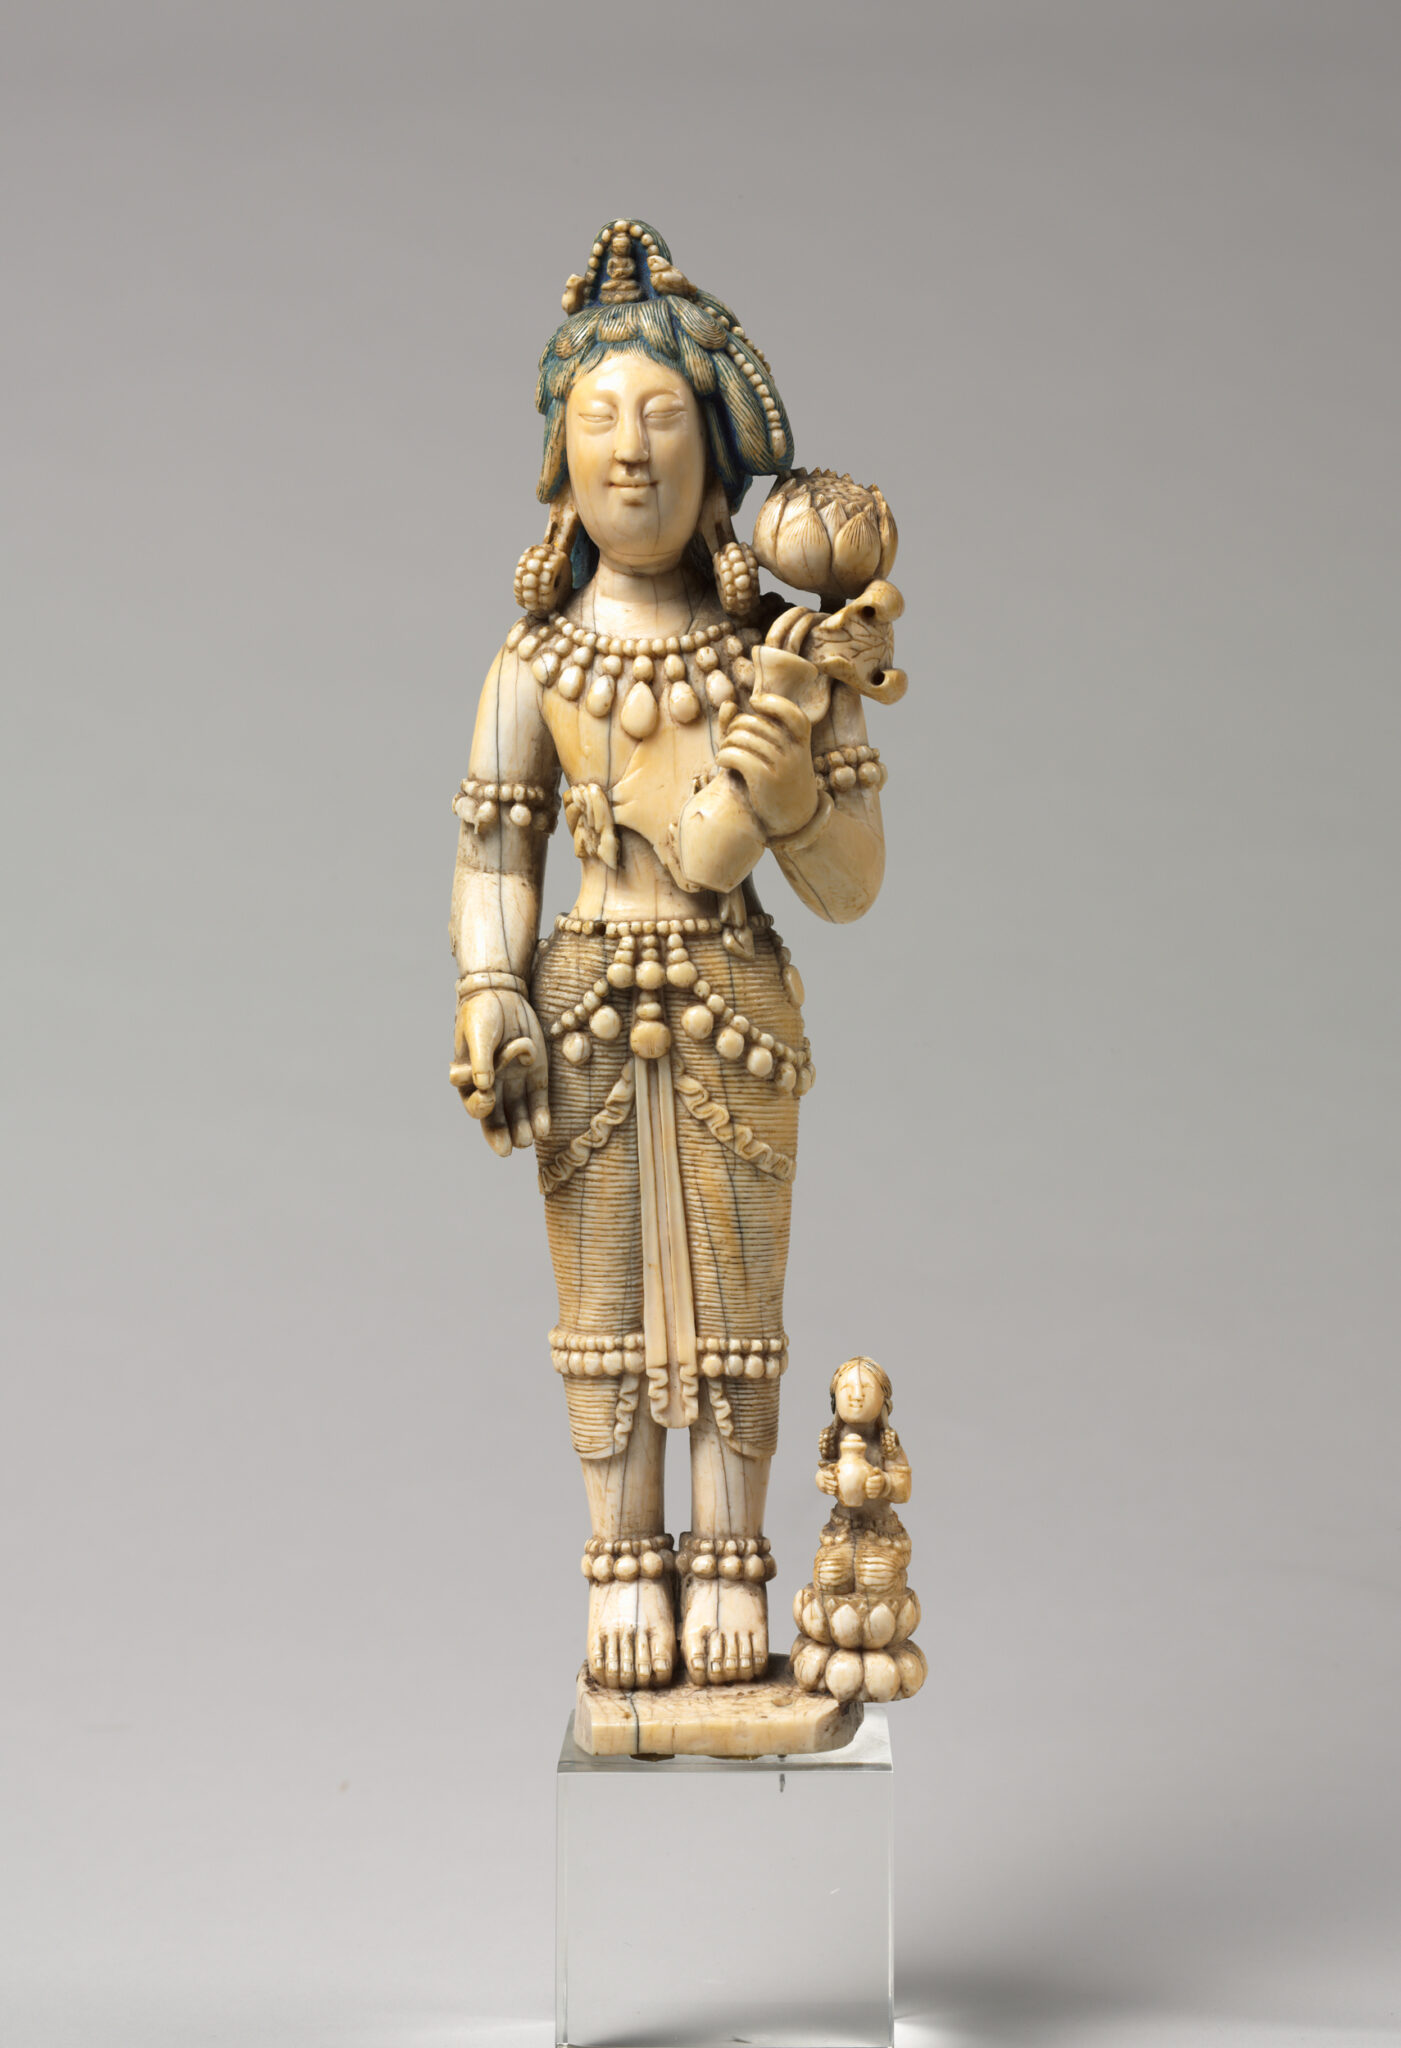 Ivory statuette depicting Bodhisattva wearing finely articulated dhoti and accessories holding blossom in right hand